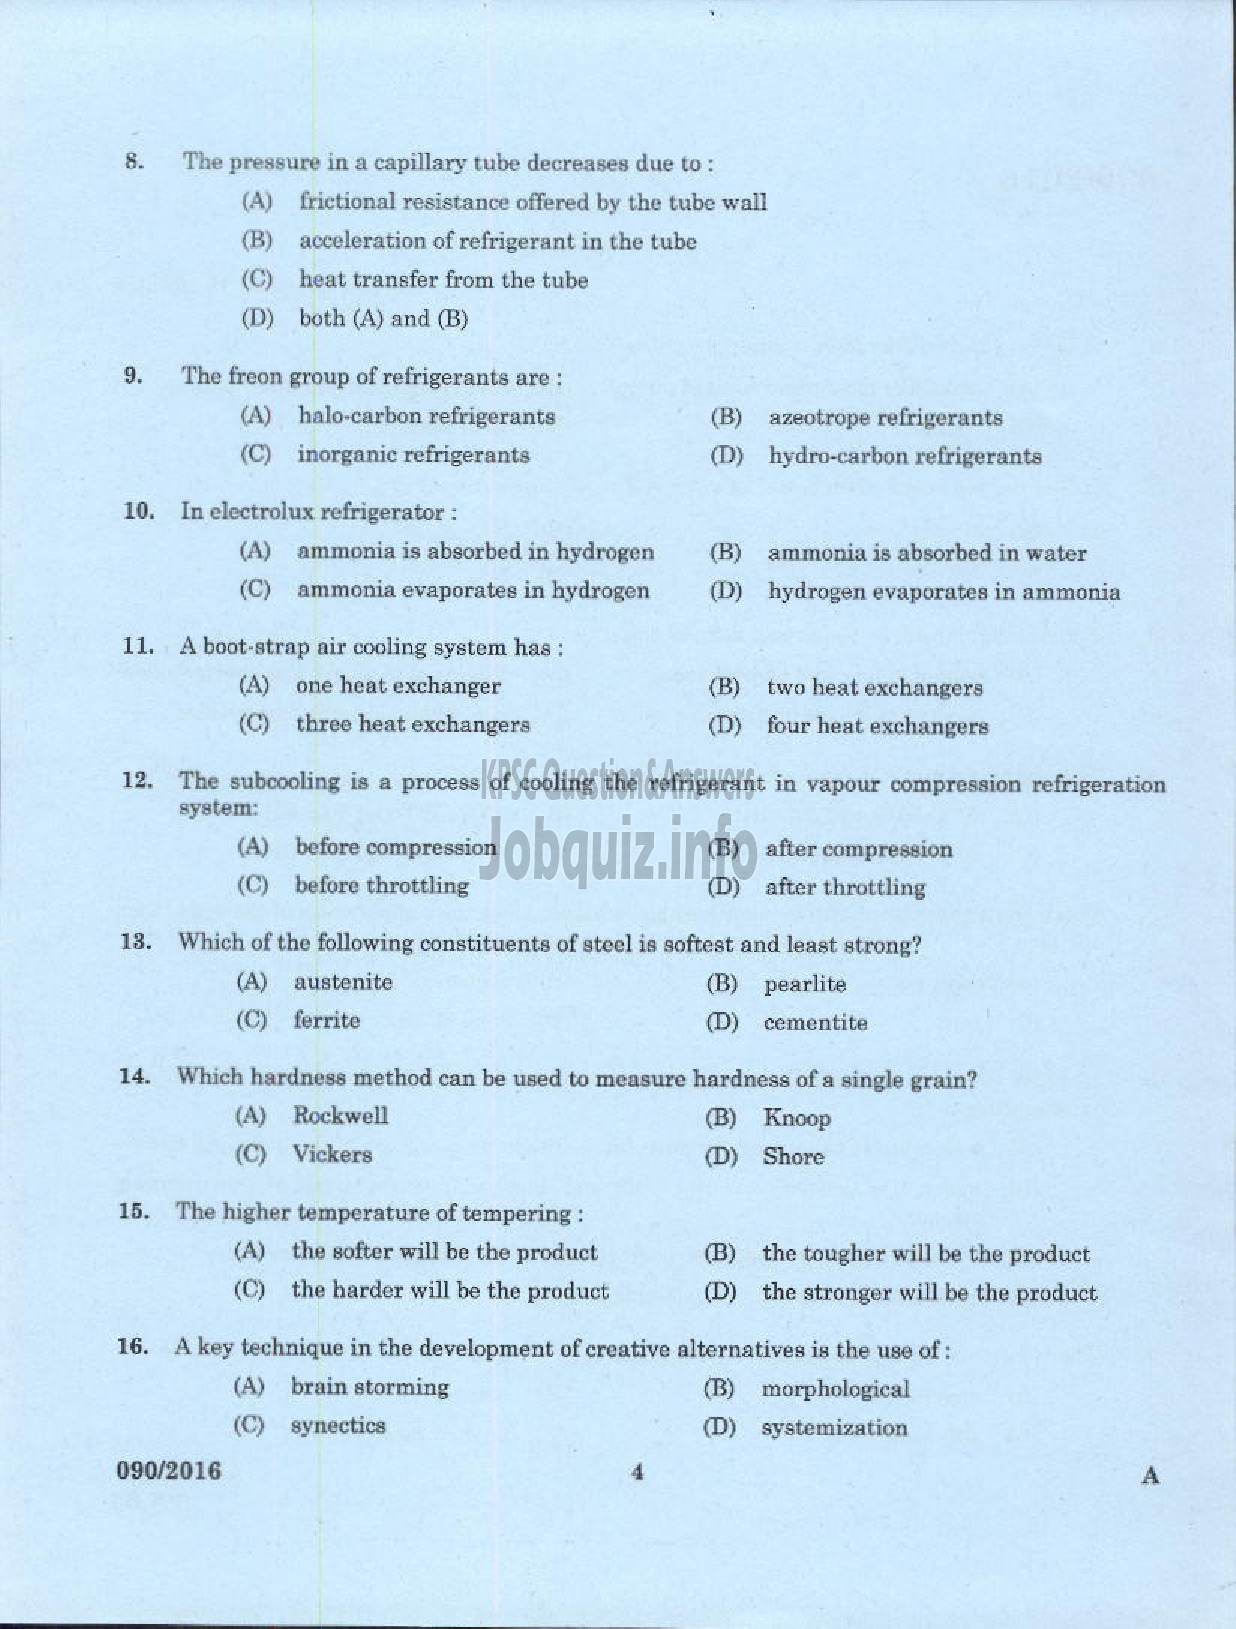 Kerala PSC Question Paper - VOCATIONAL INSTRUCTOR IN REFRIGERATION AND AIR CONDITIONING VHSE-2